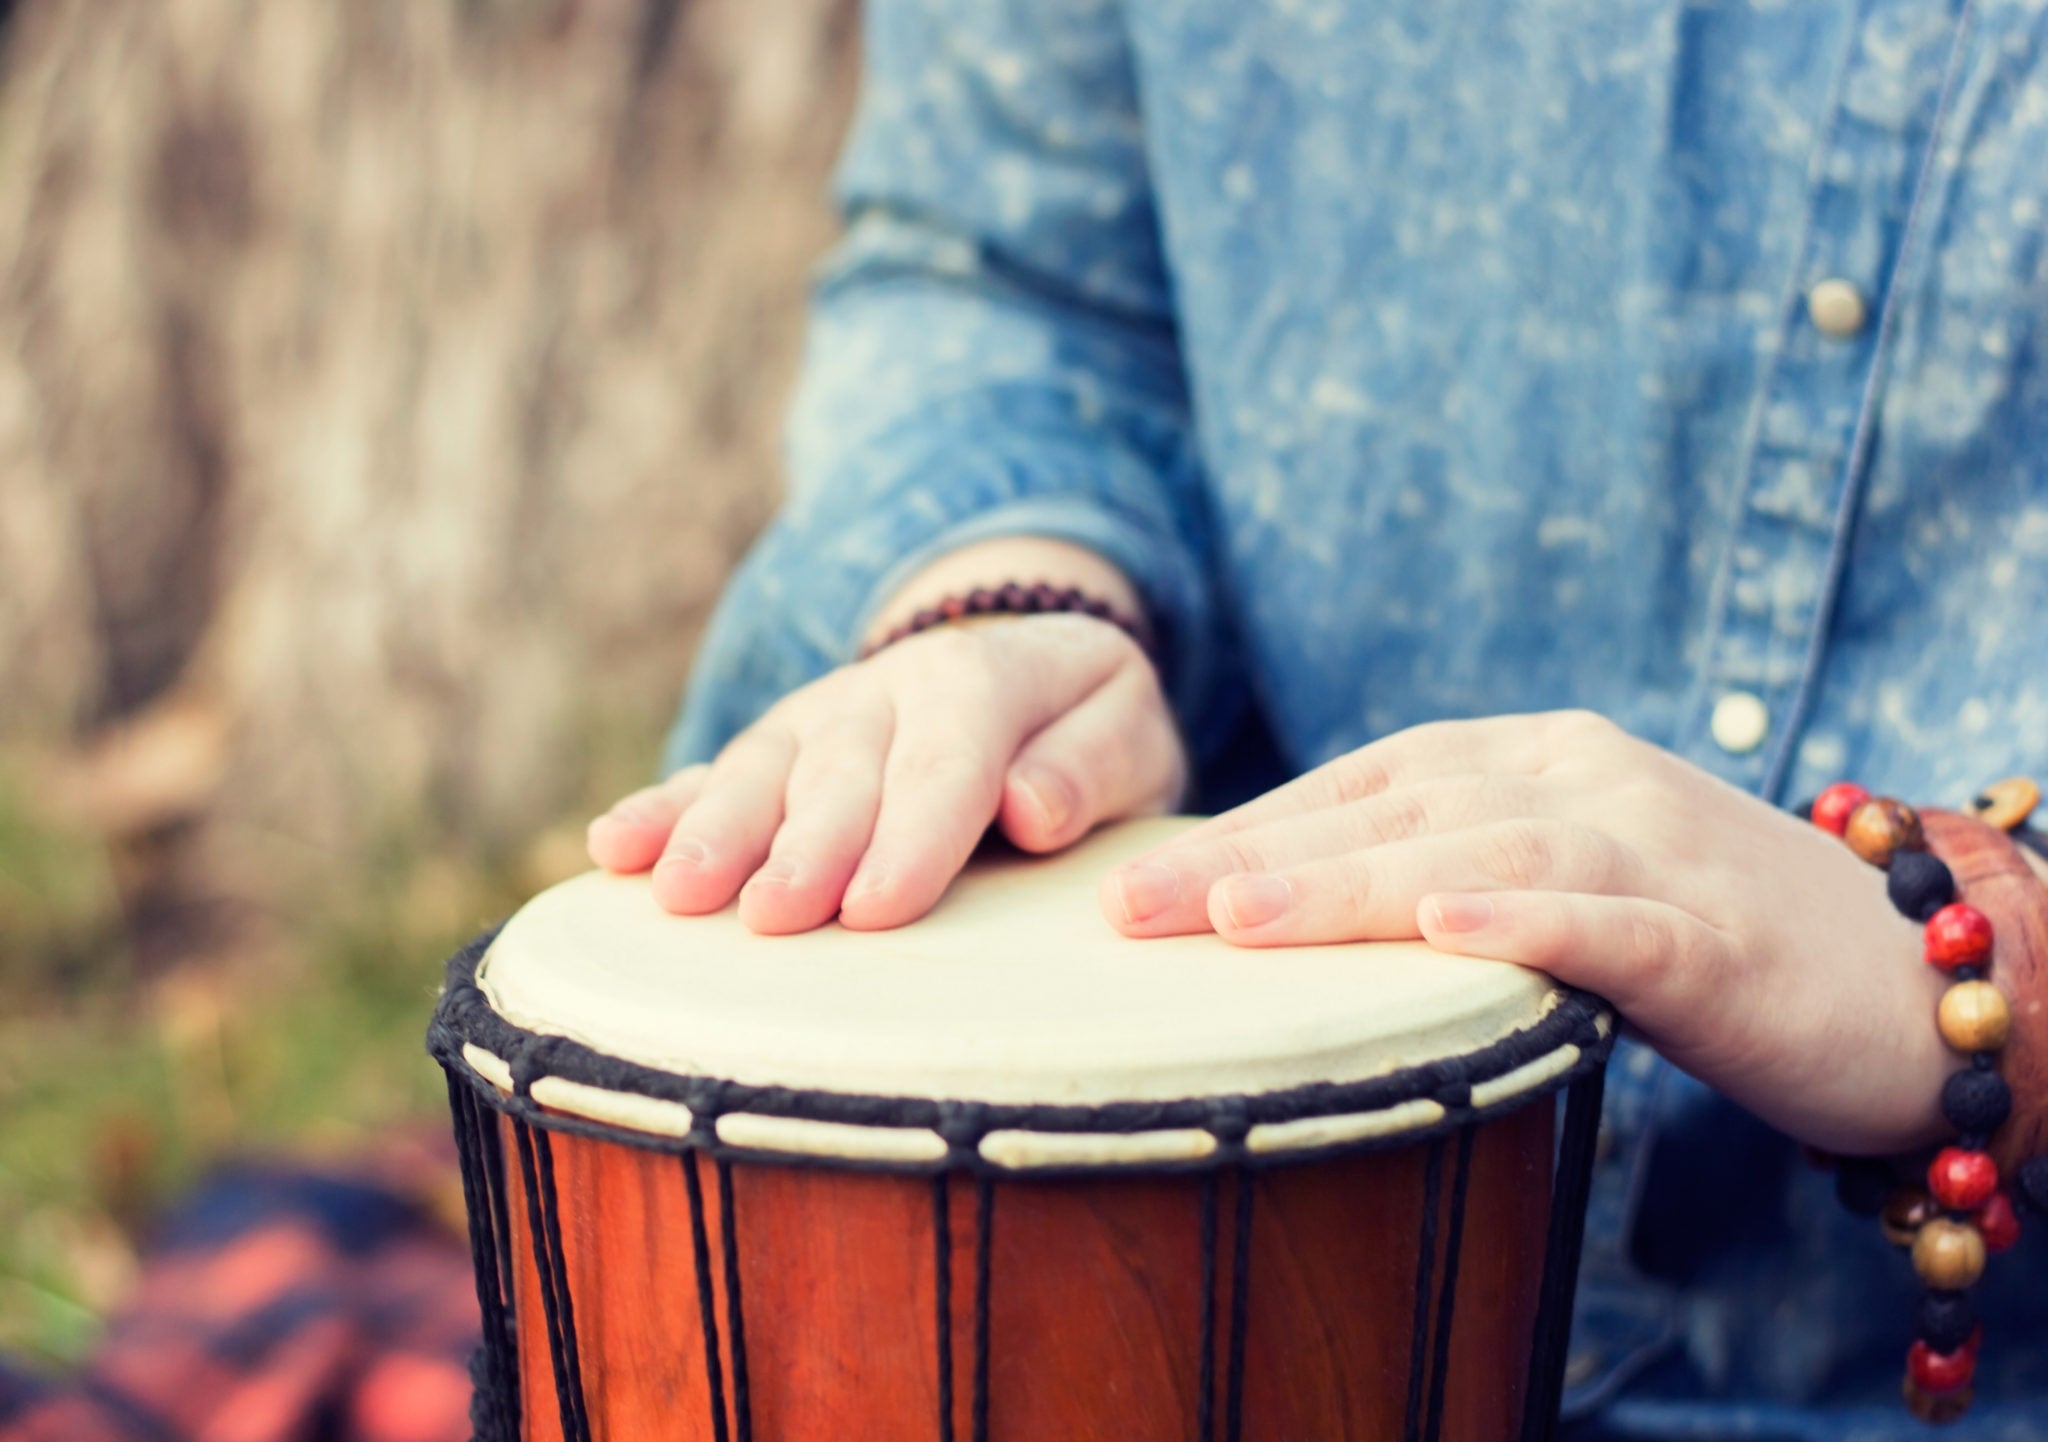 Drums Used In Music Therapy | Normans Blog